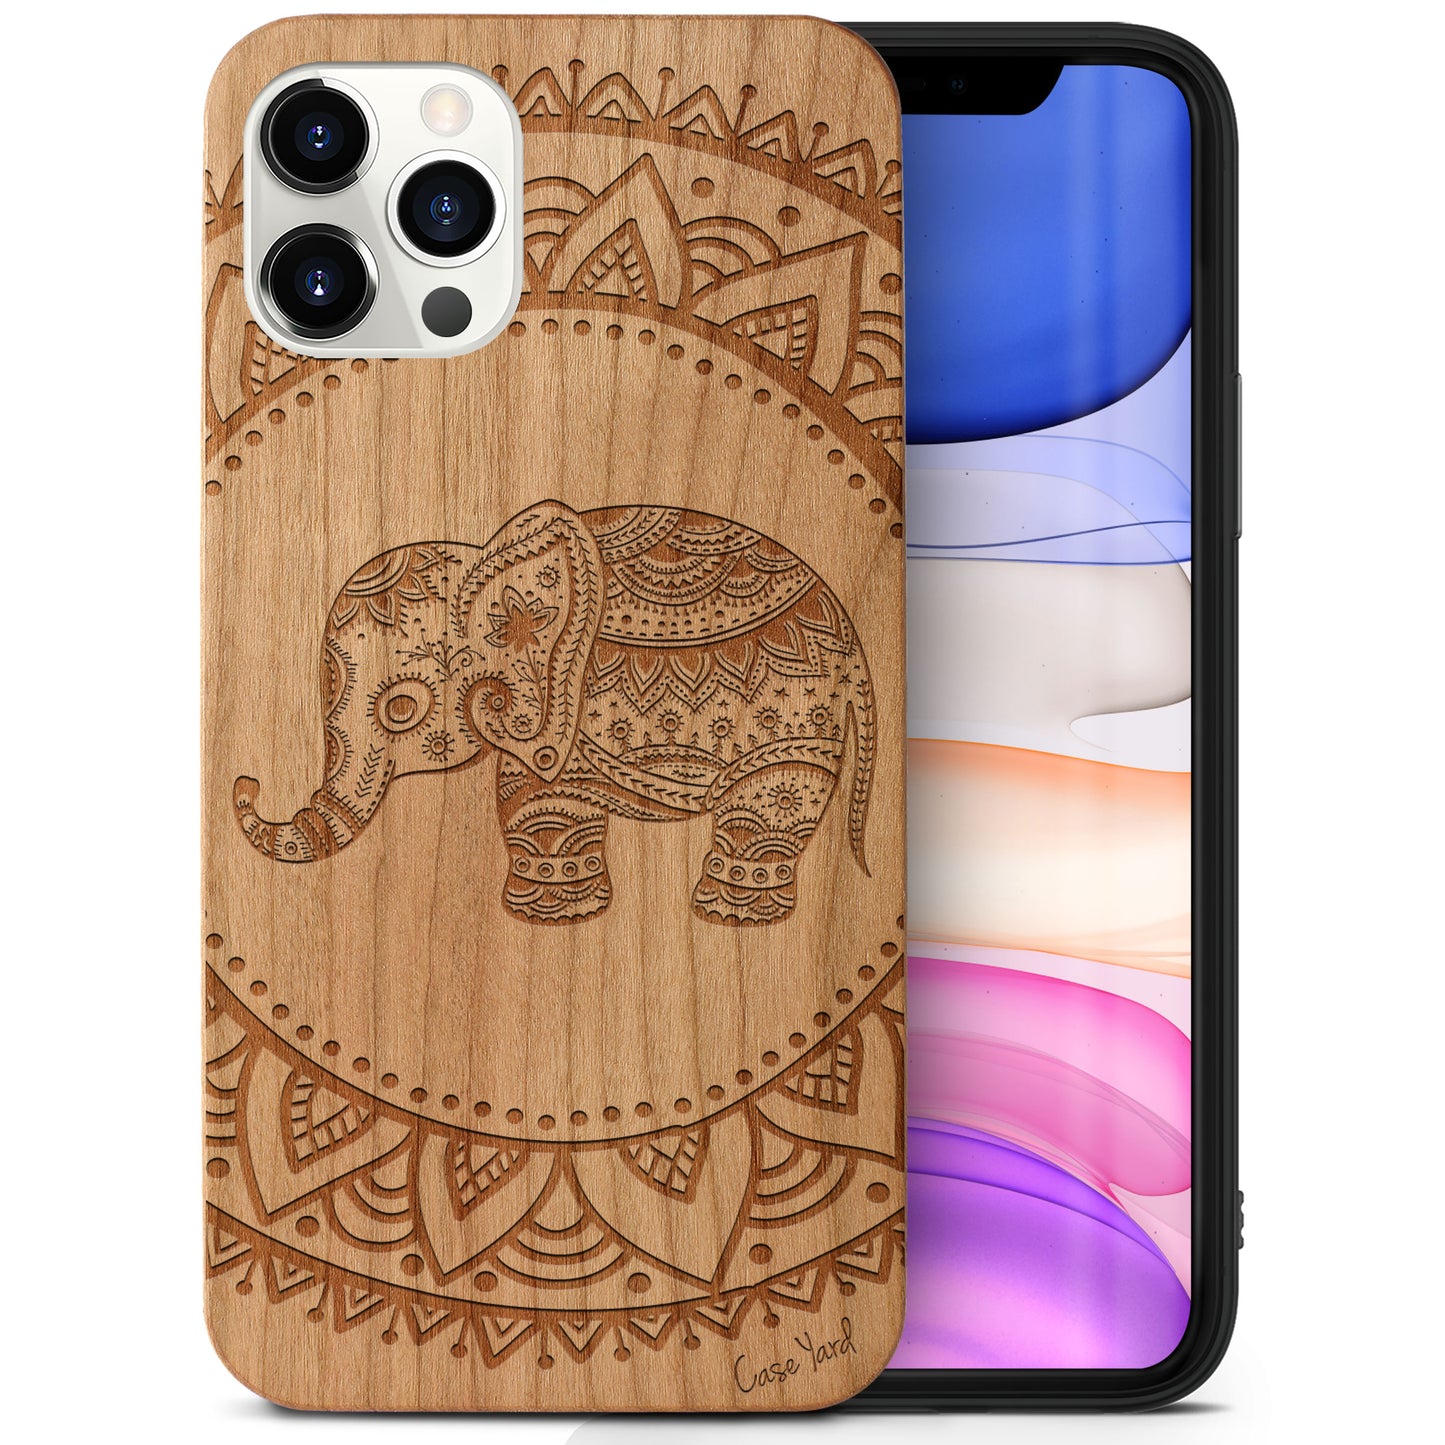 Wooden Cell Phone Case Cover, Laser Engraved case for iPhone & Samsung phone Elephant Mandala Wood Design